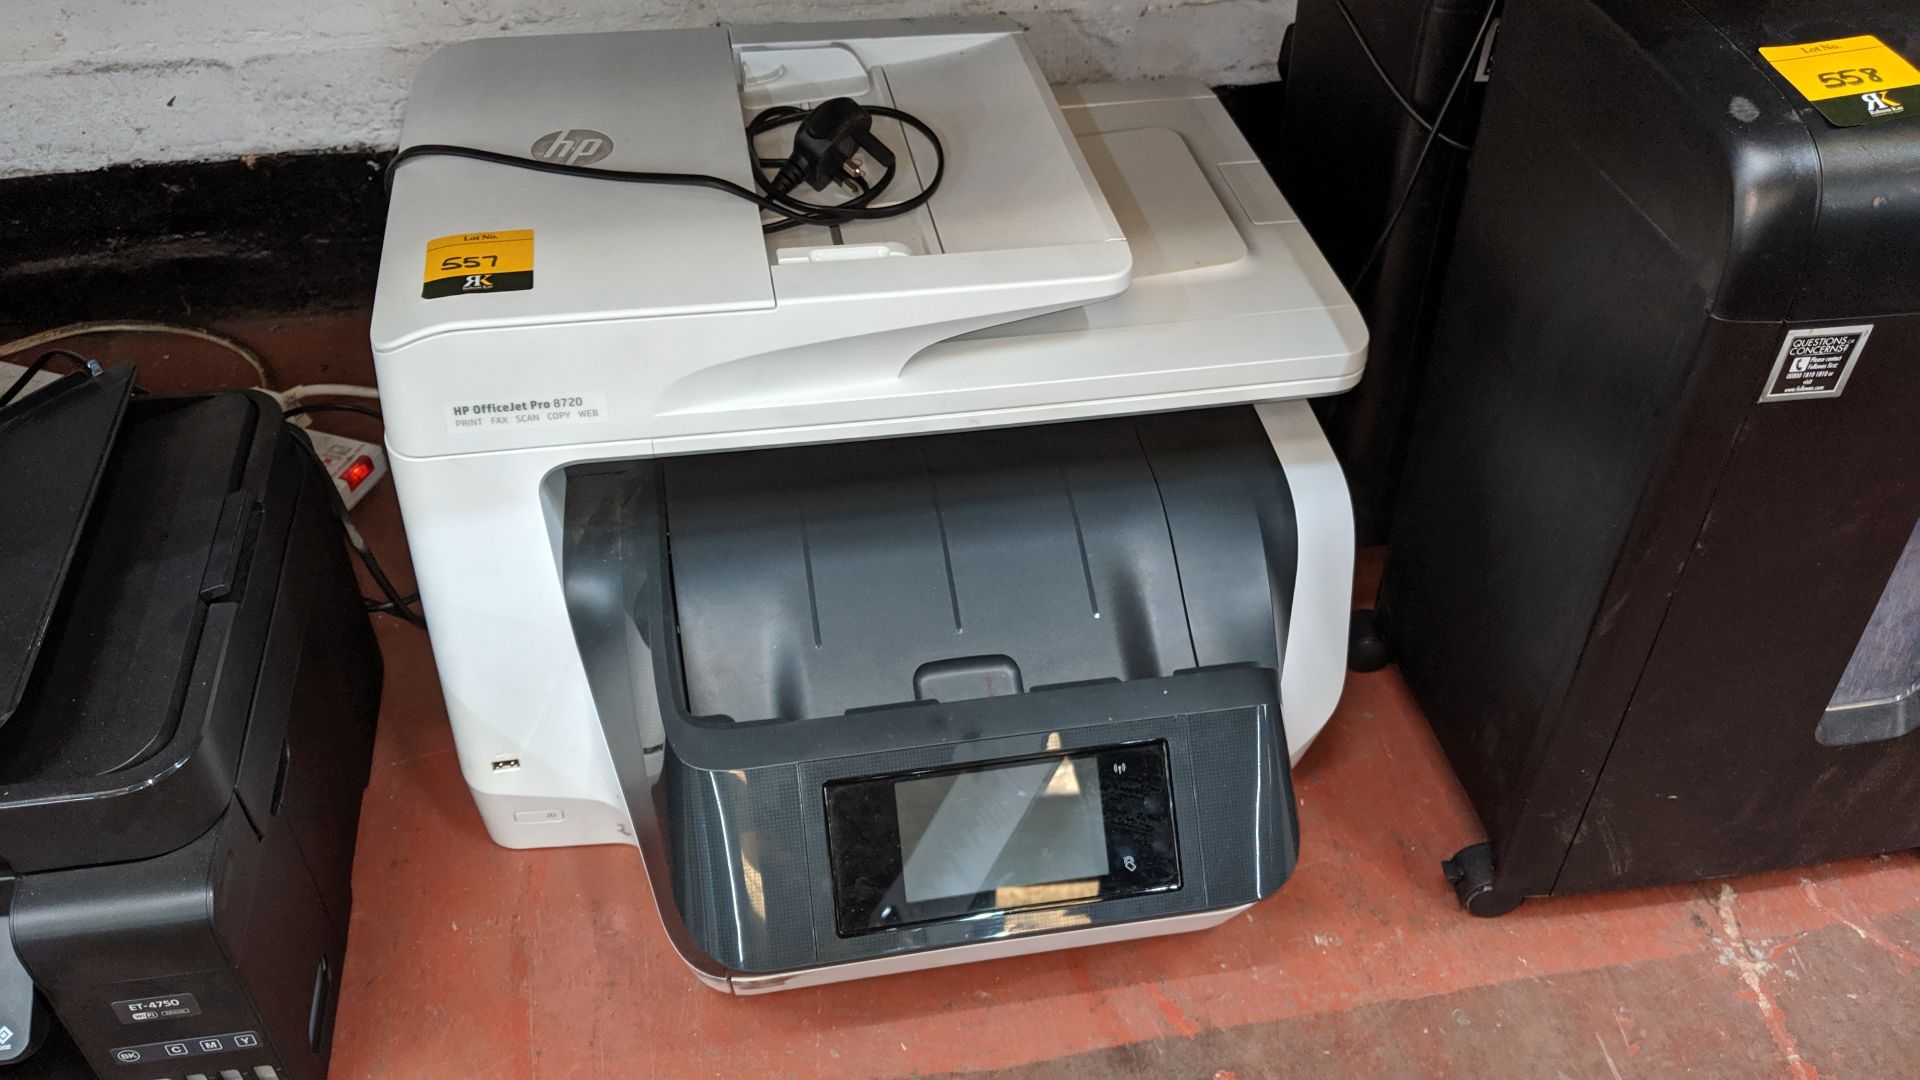 HP OfficeJet Pro 8720 multifunction printer. This is one of a large number of lots used/owned by One